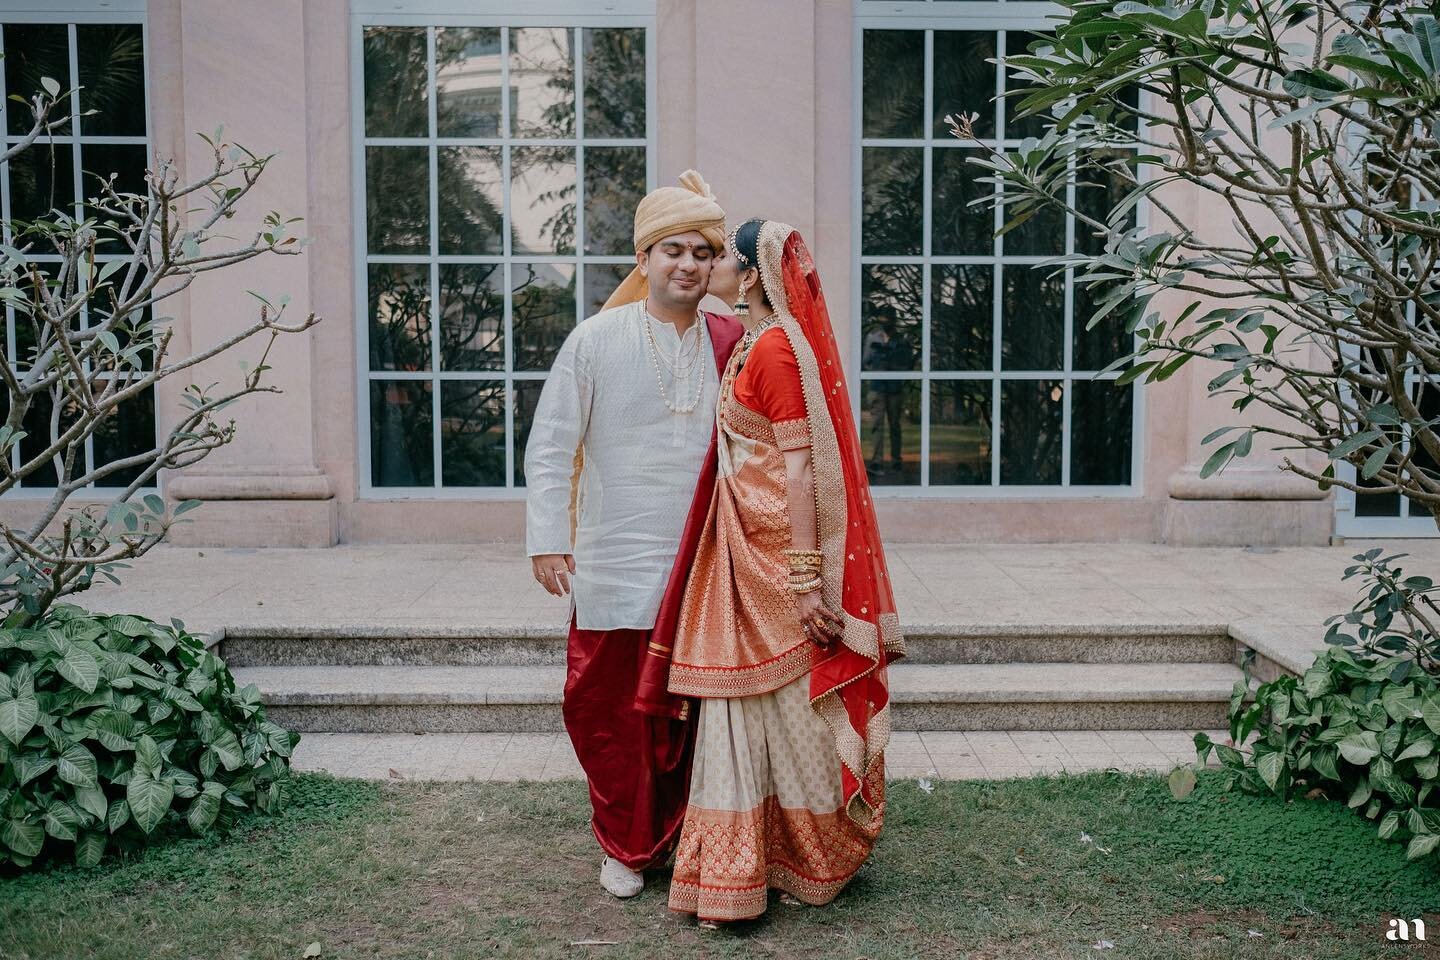 Foram &amp; Amit- Feb&rsquo;21
There are so many stories that I can tell from this wedding but I would rather not because that could never express the emotions I felt that day 🥰
Sharing few of my favourites from the wedding day of @foram_b &amp; @am